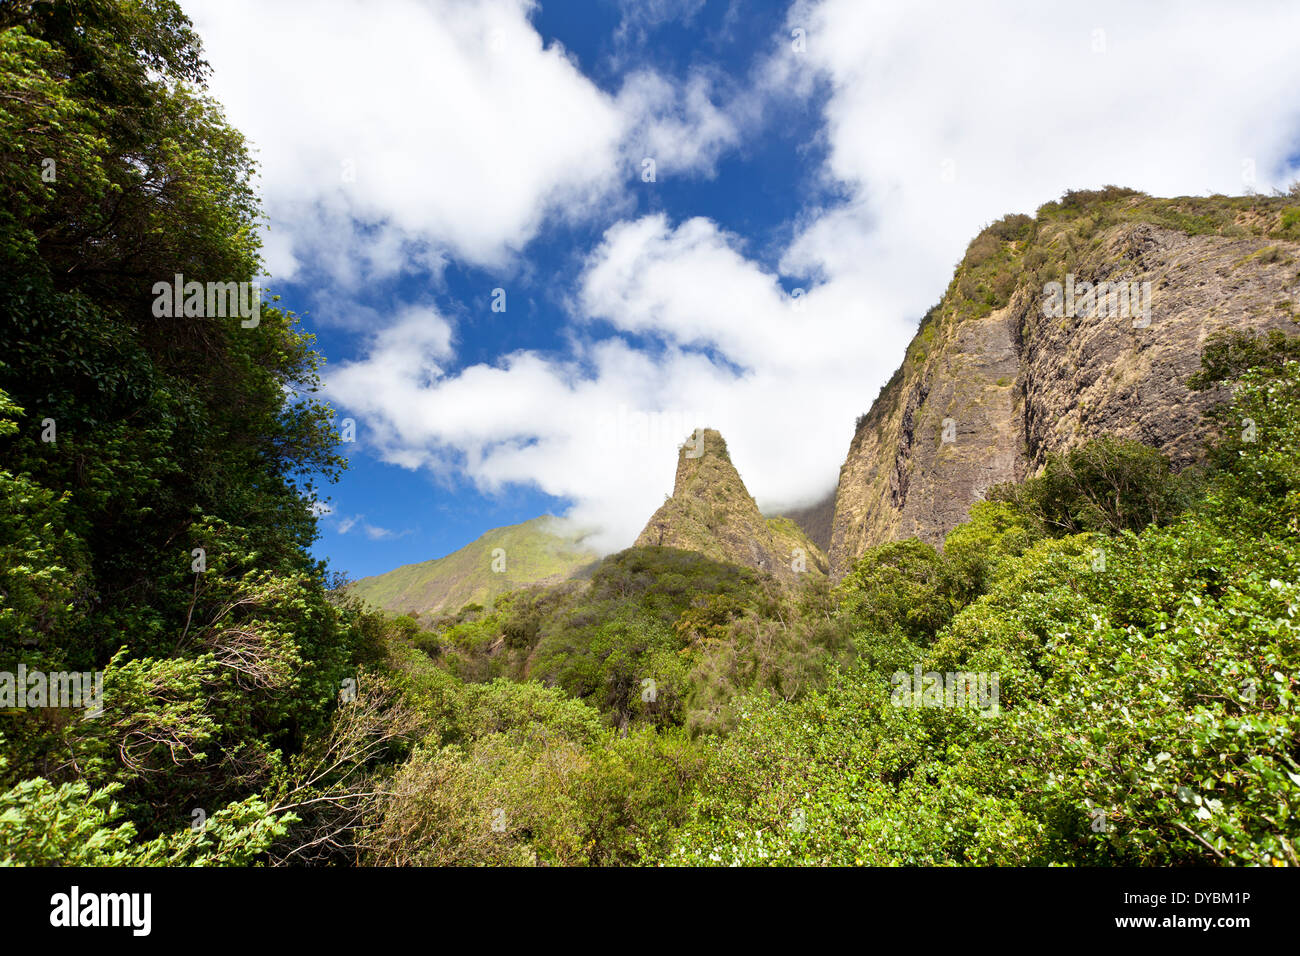 The famous Iao Needle in the Iao Valley State Park in Maui, Hawaii. Stock Photo